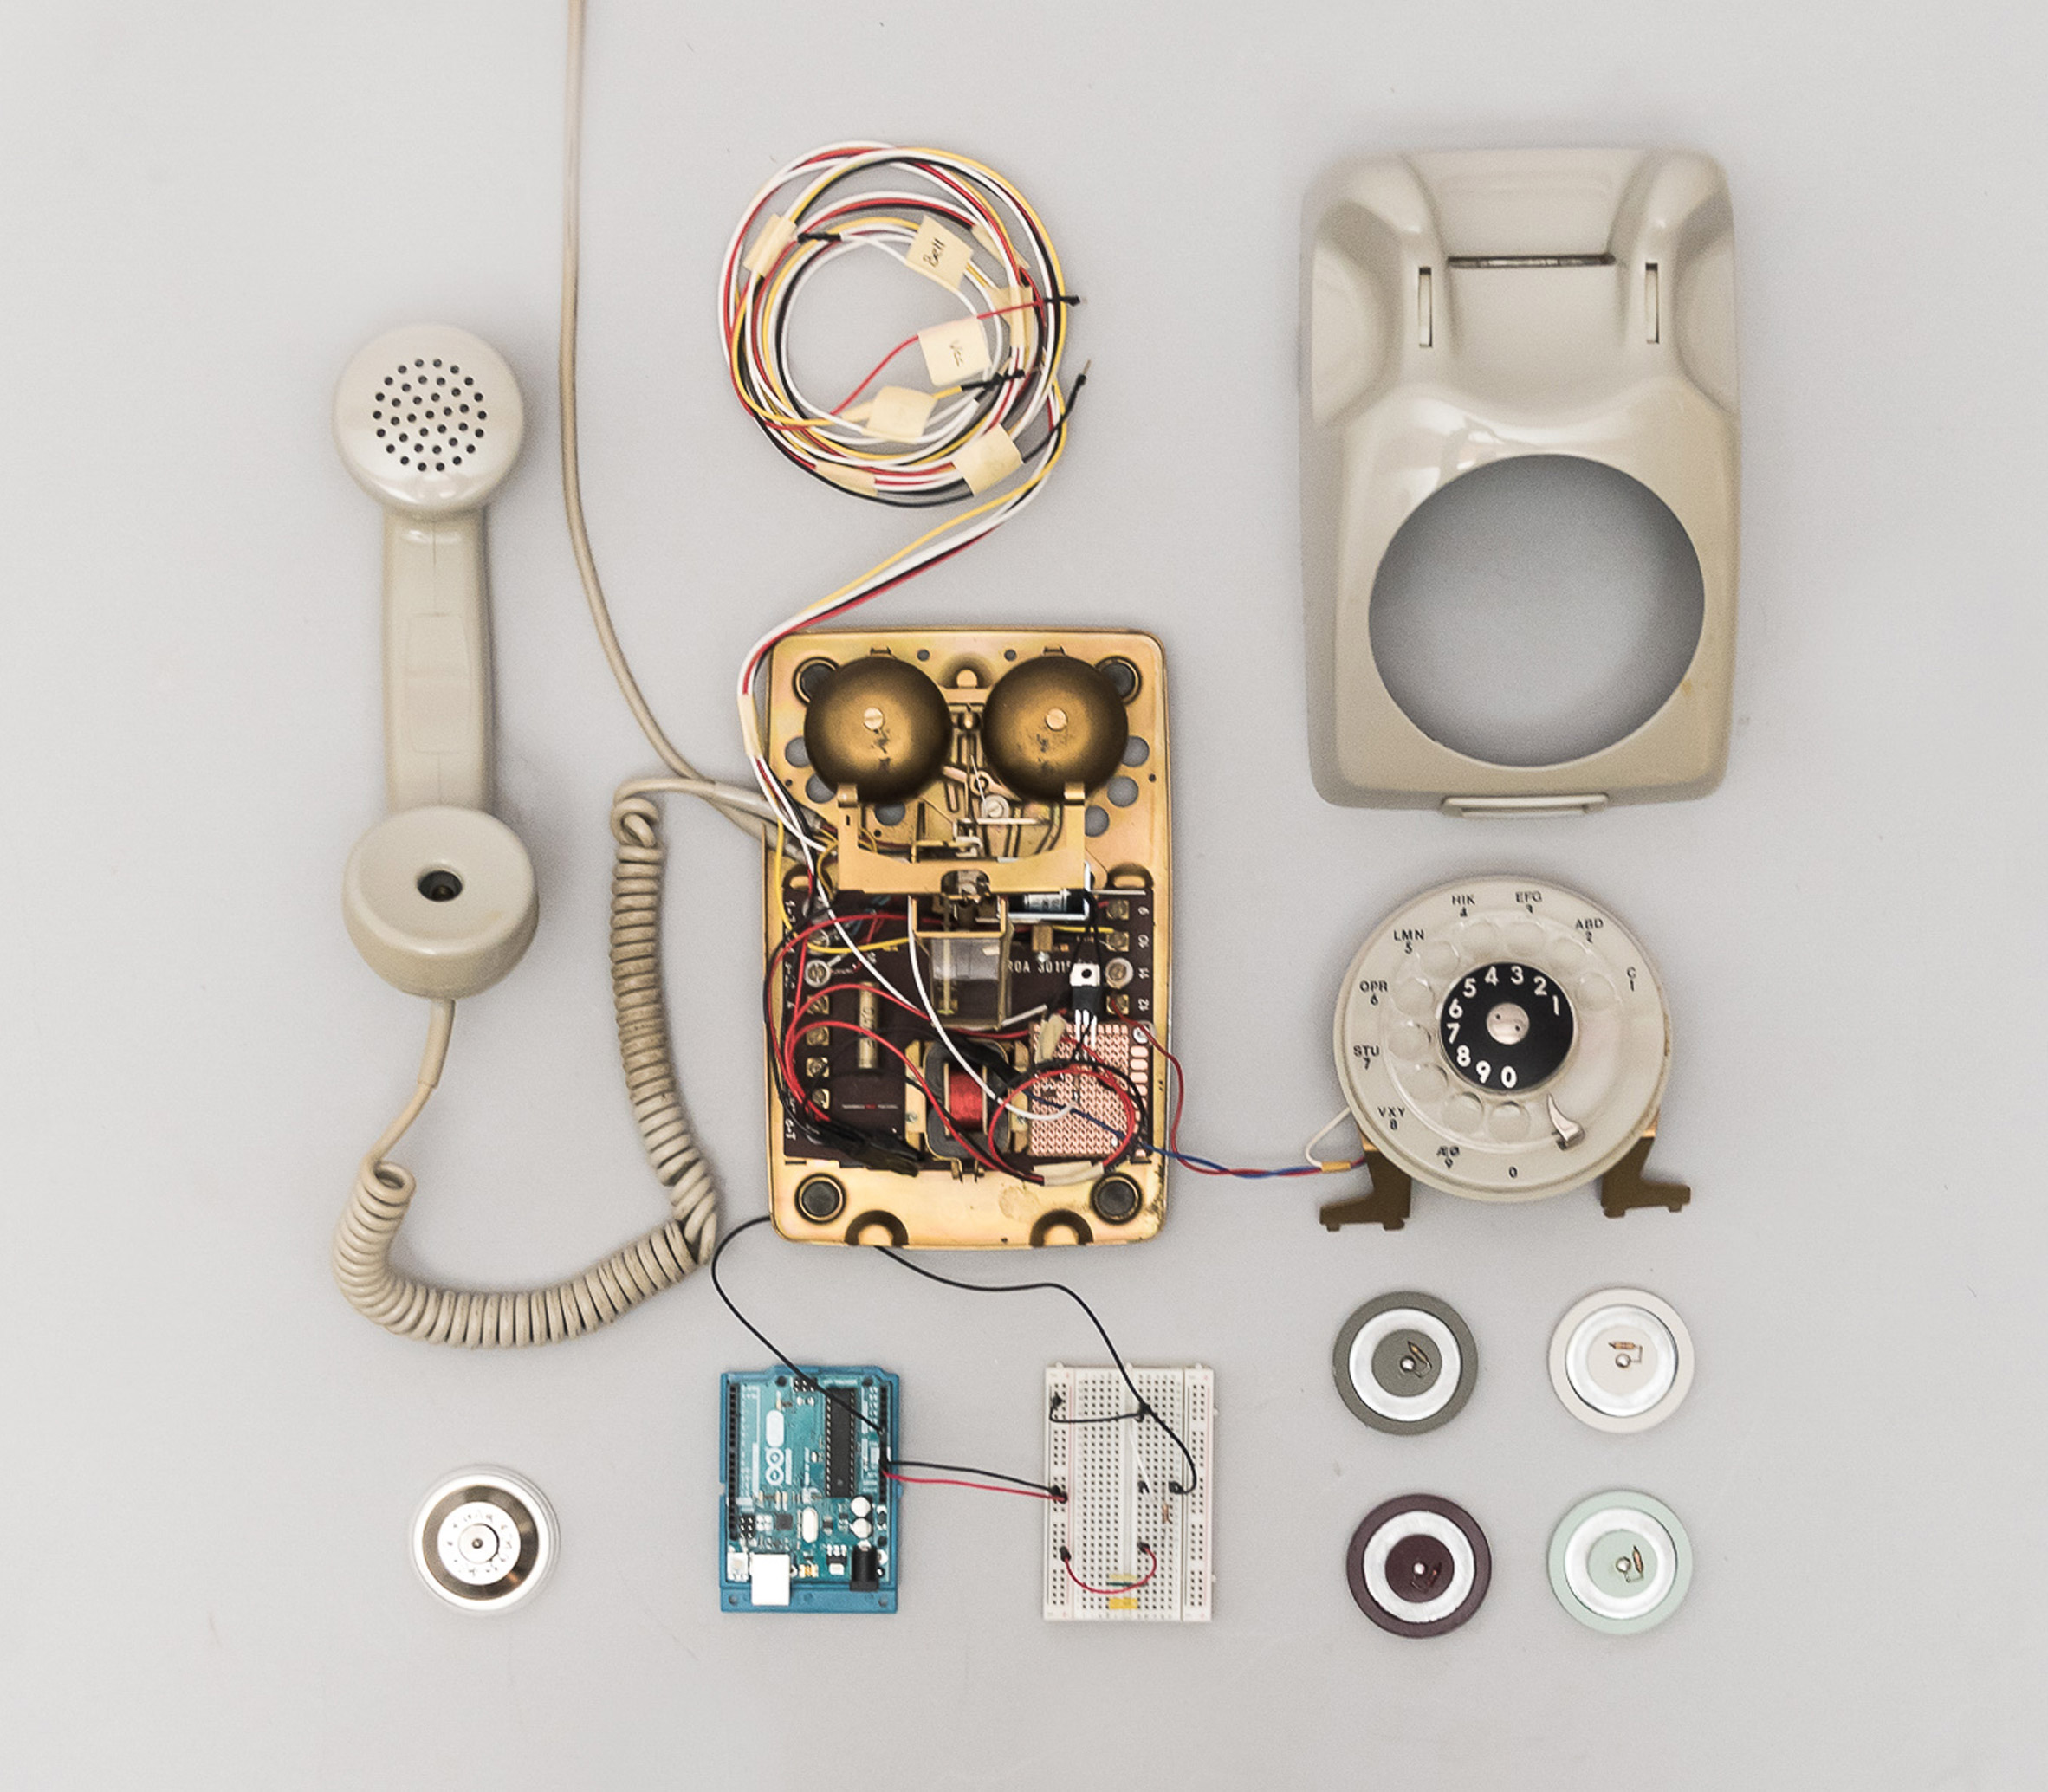 Students design rotary phone that can literally dial up the internet